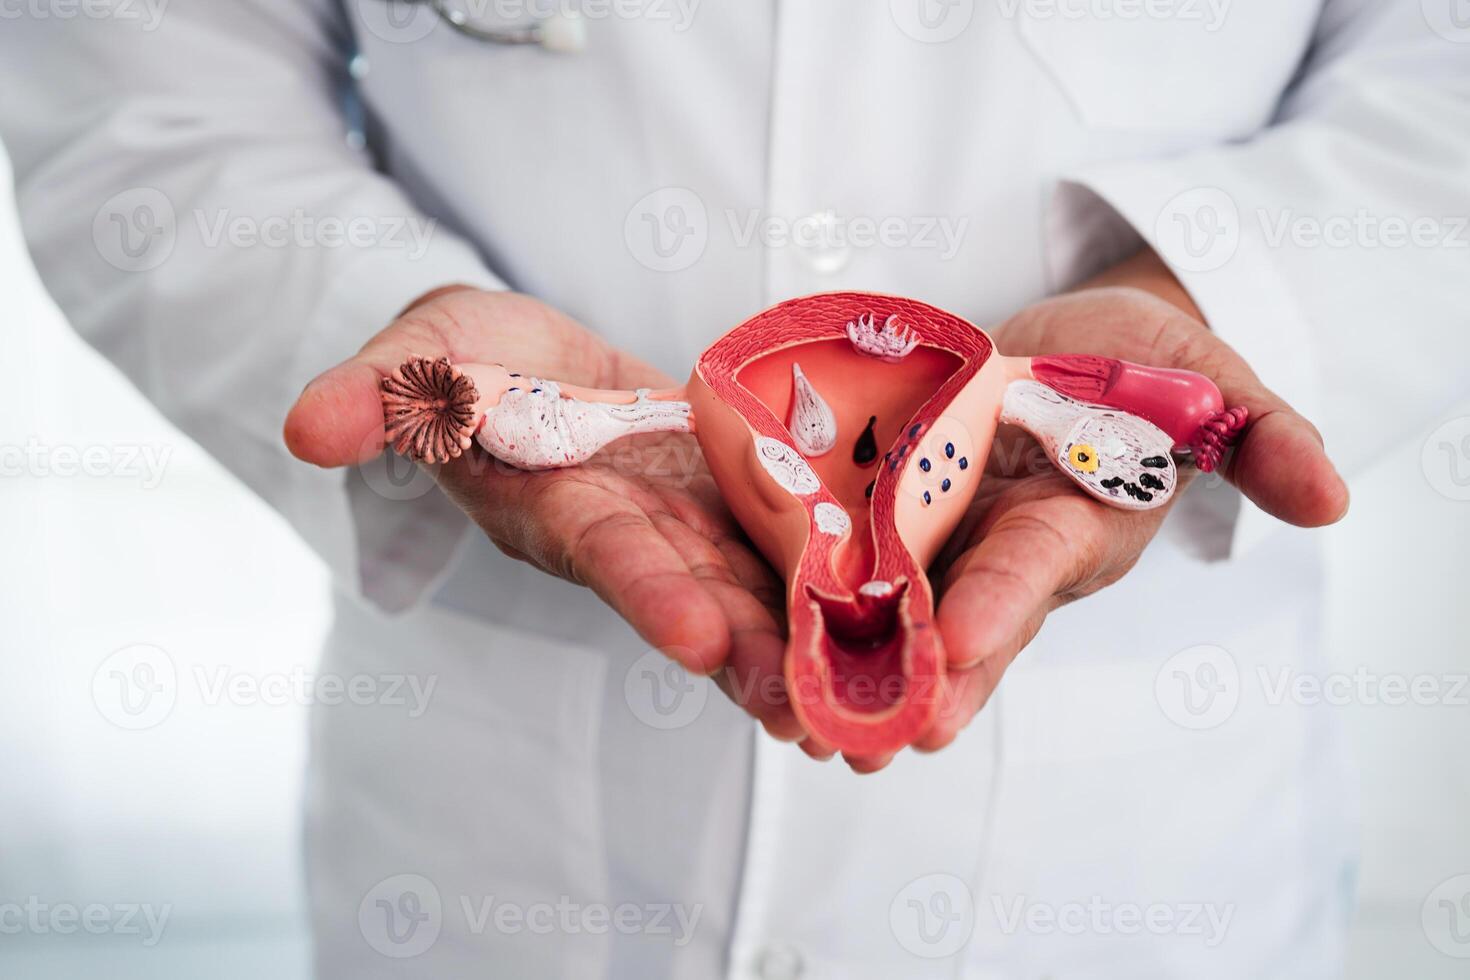 Uterus, doctor holding human anatomy model for study diagnosis and treatment in hospital. photo